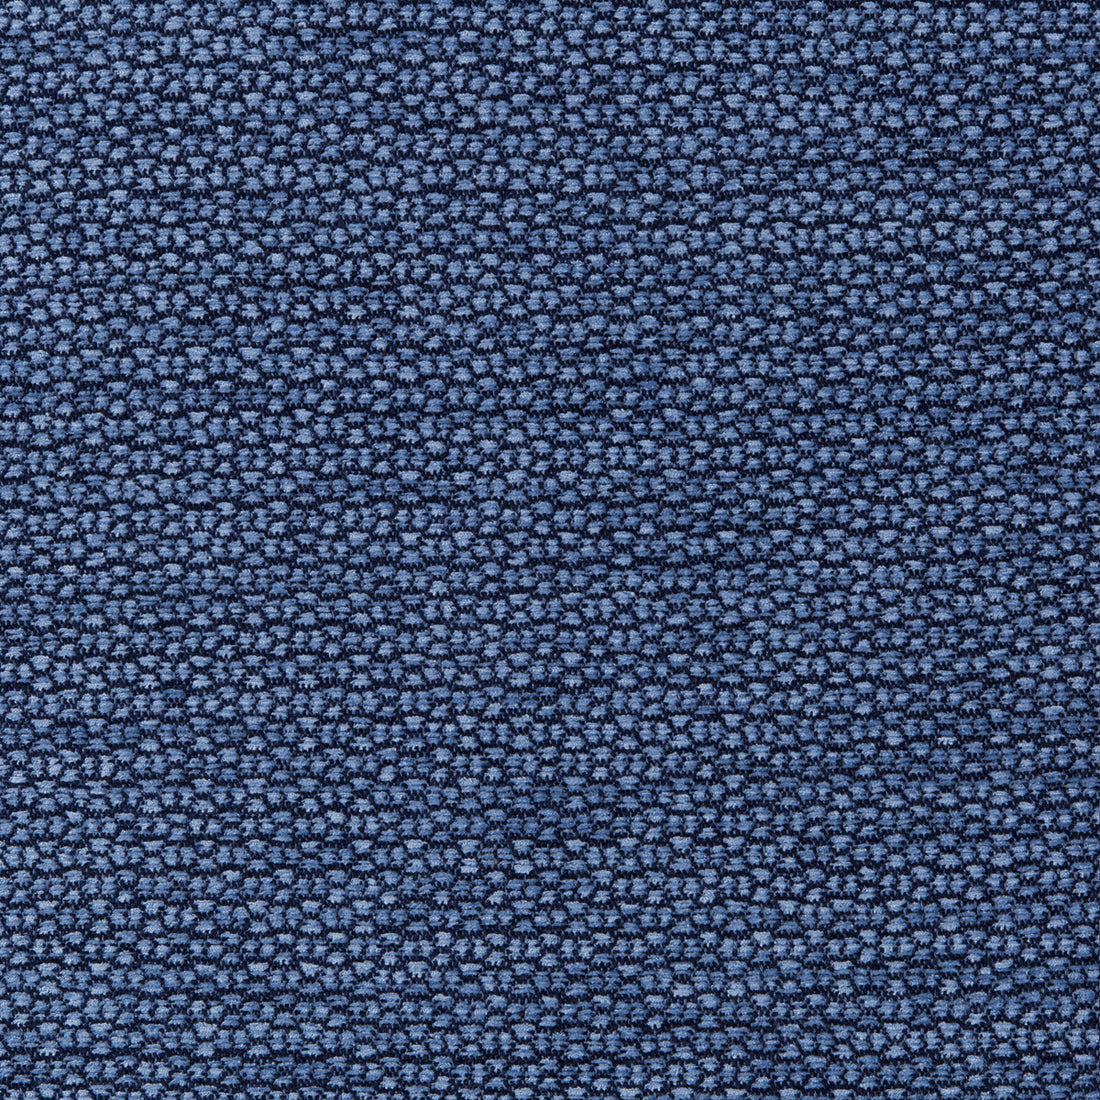 Marolay Texture fabric in blue color - pattern 8019144.5.0 - by Brunschwig &amp; Fils in the Chambery Textures II collection